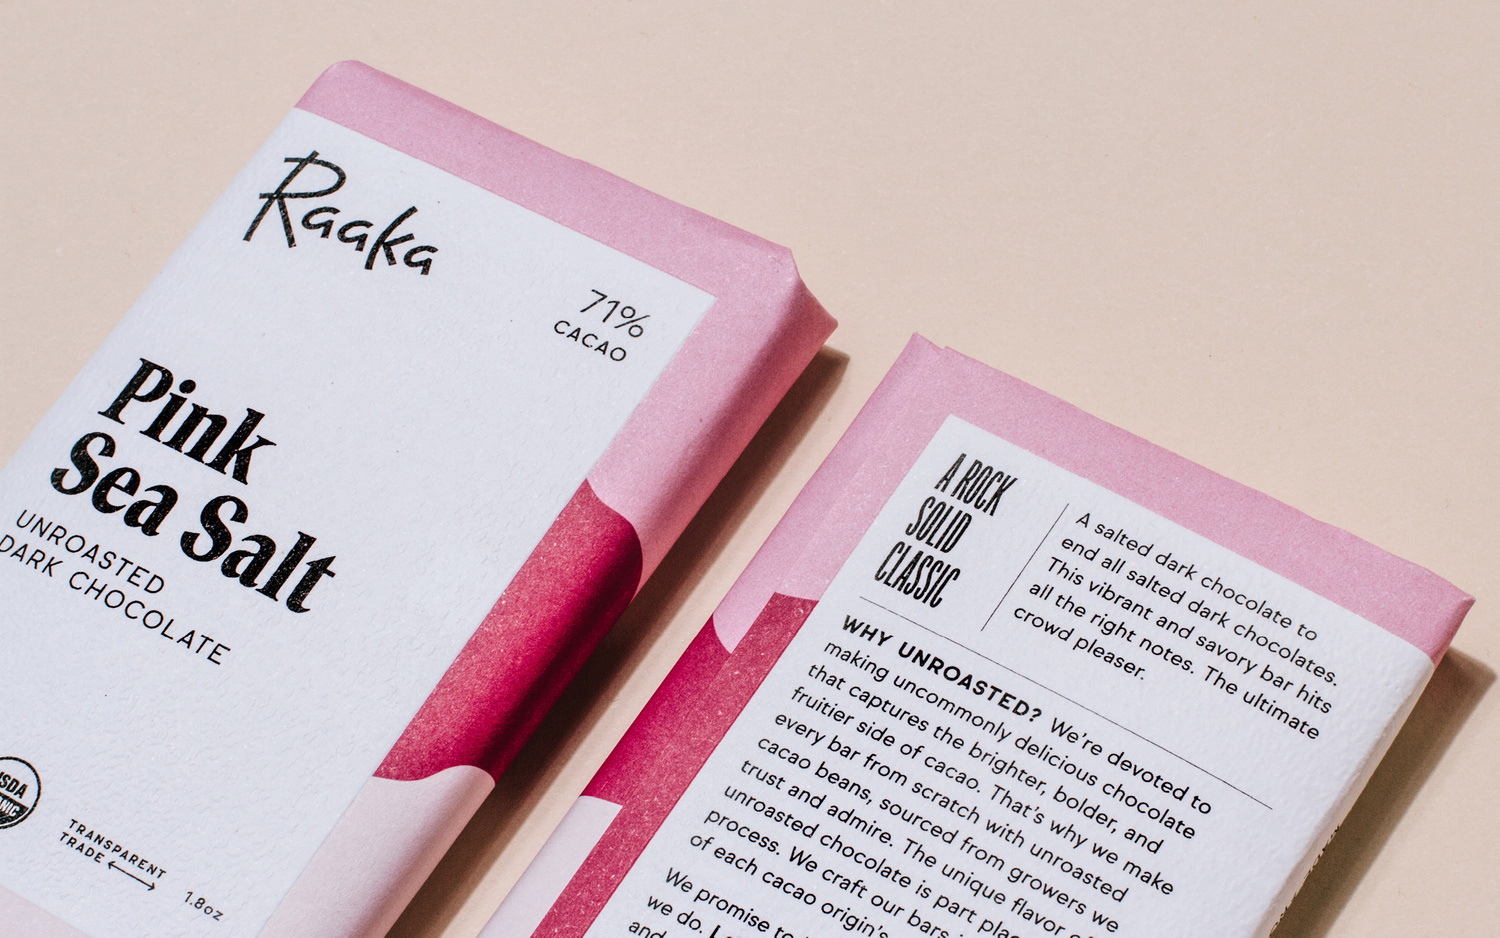 New Logo and Packaging for Raaka by Andrea Trabucco-Campos and Simon Blockley